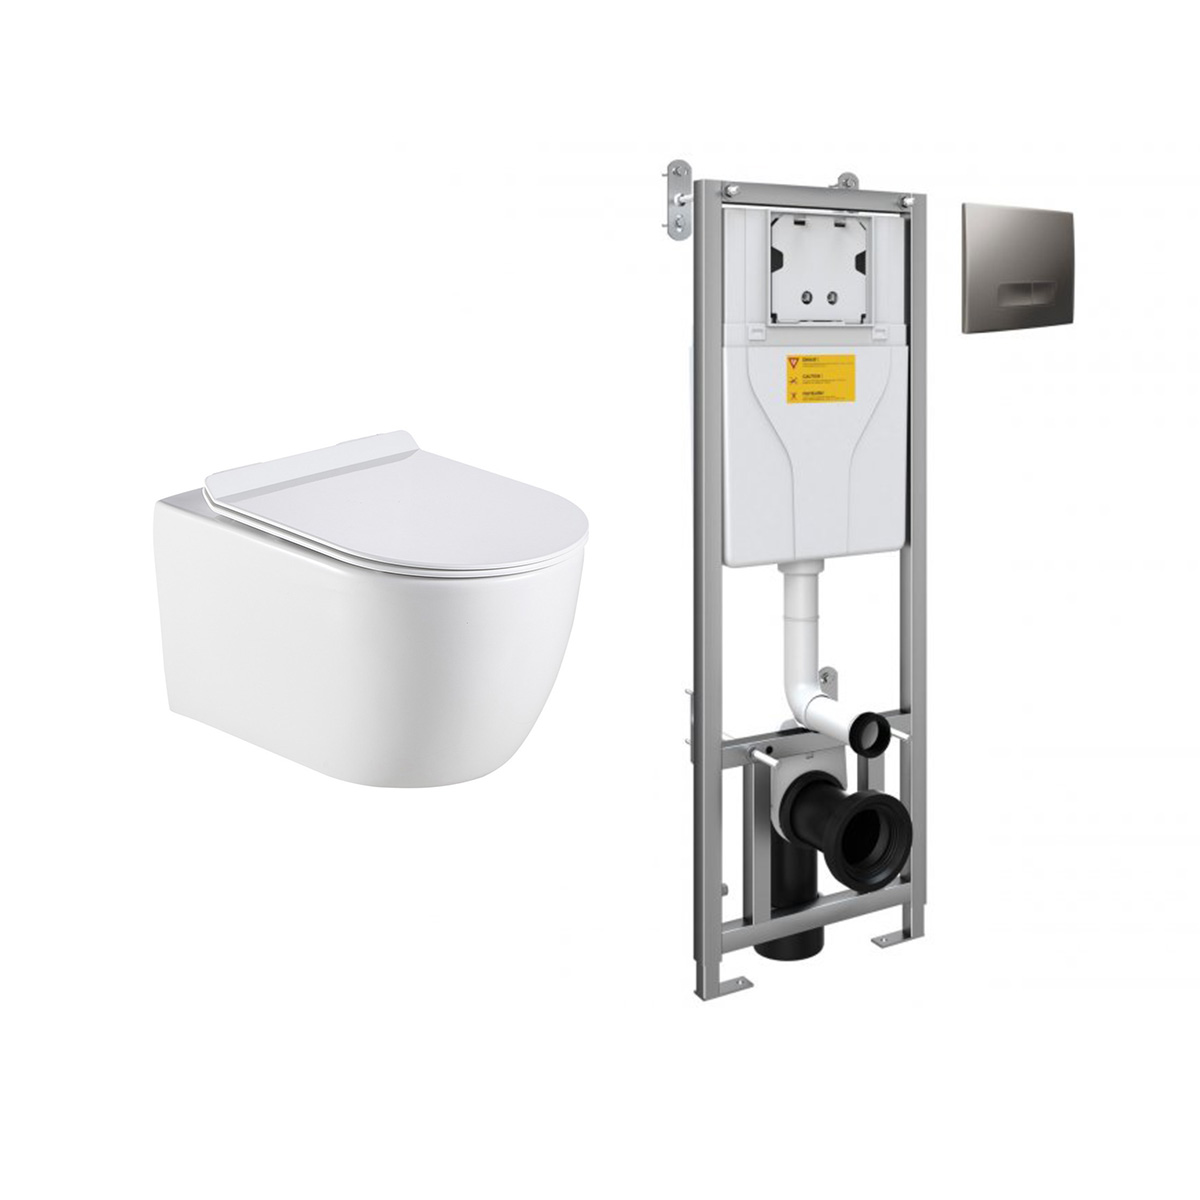 Remo Wall Hung Toilet and 1.1m Wall Hung Frame Deal including Chrome Flush Plate